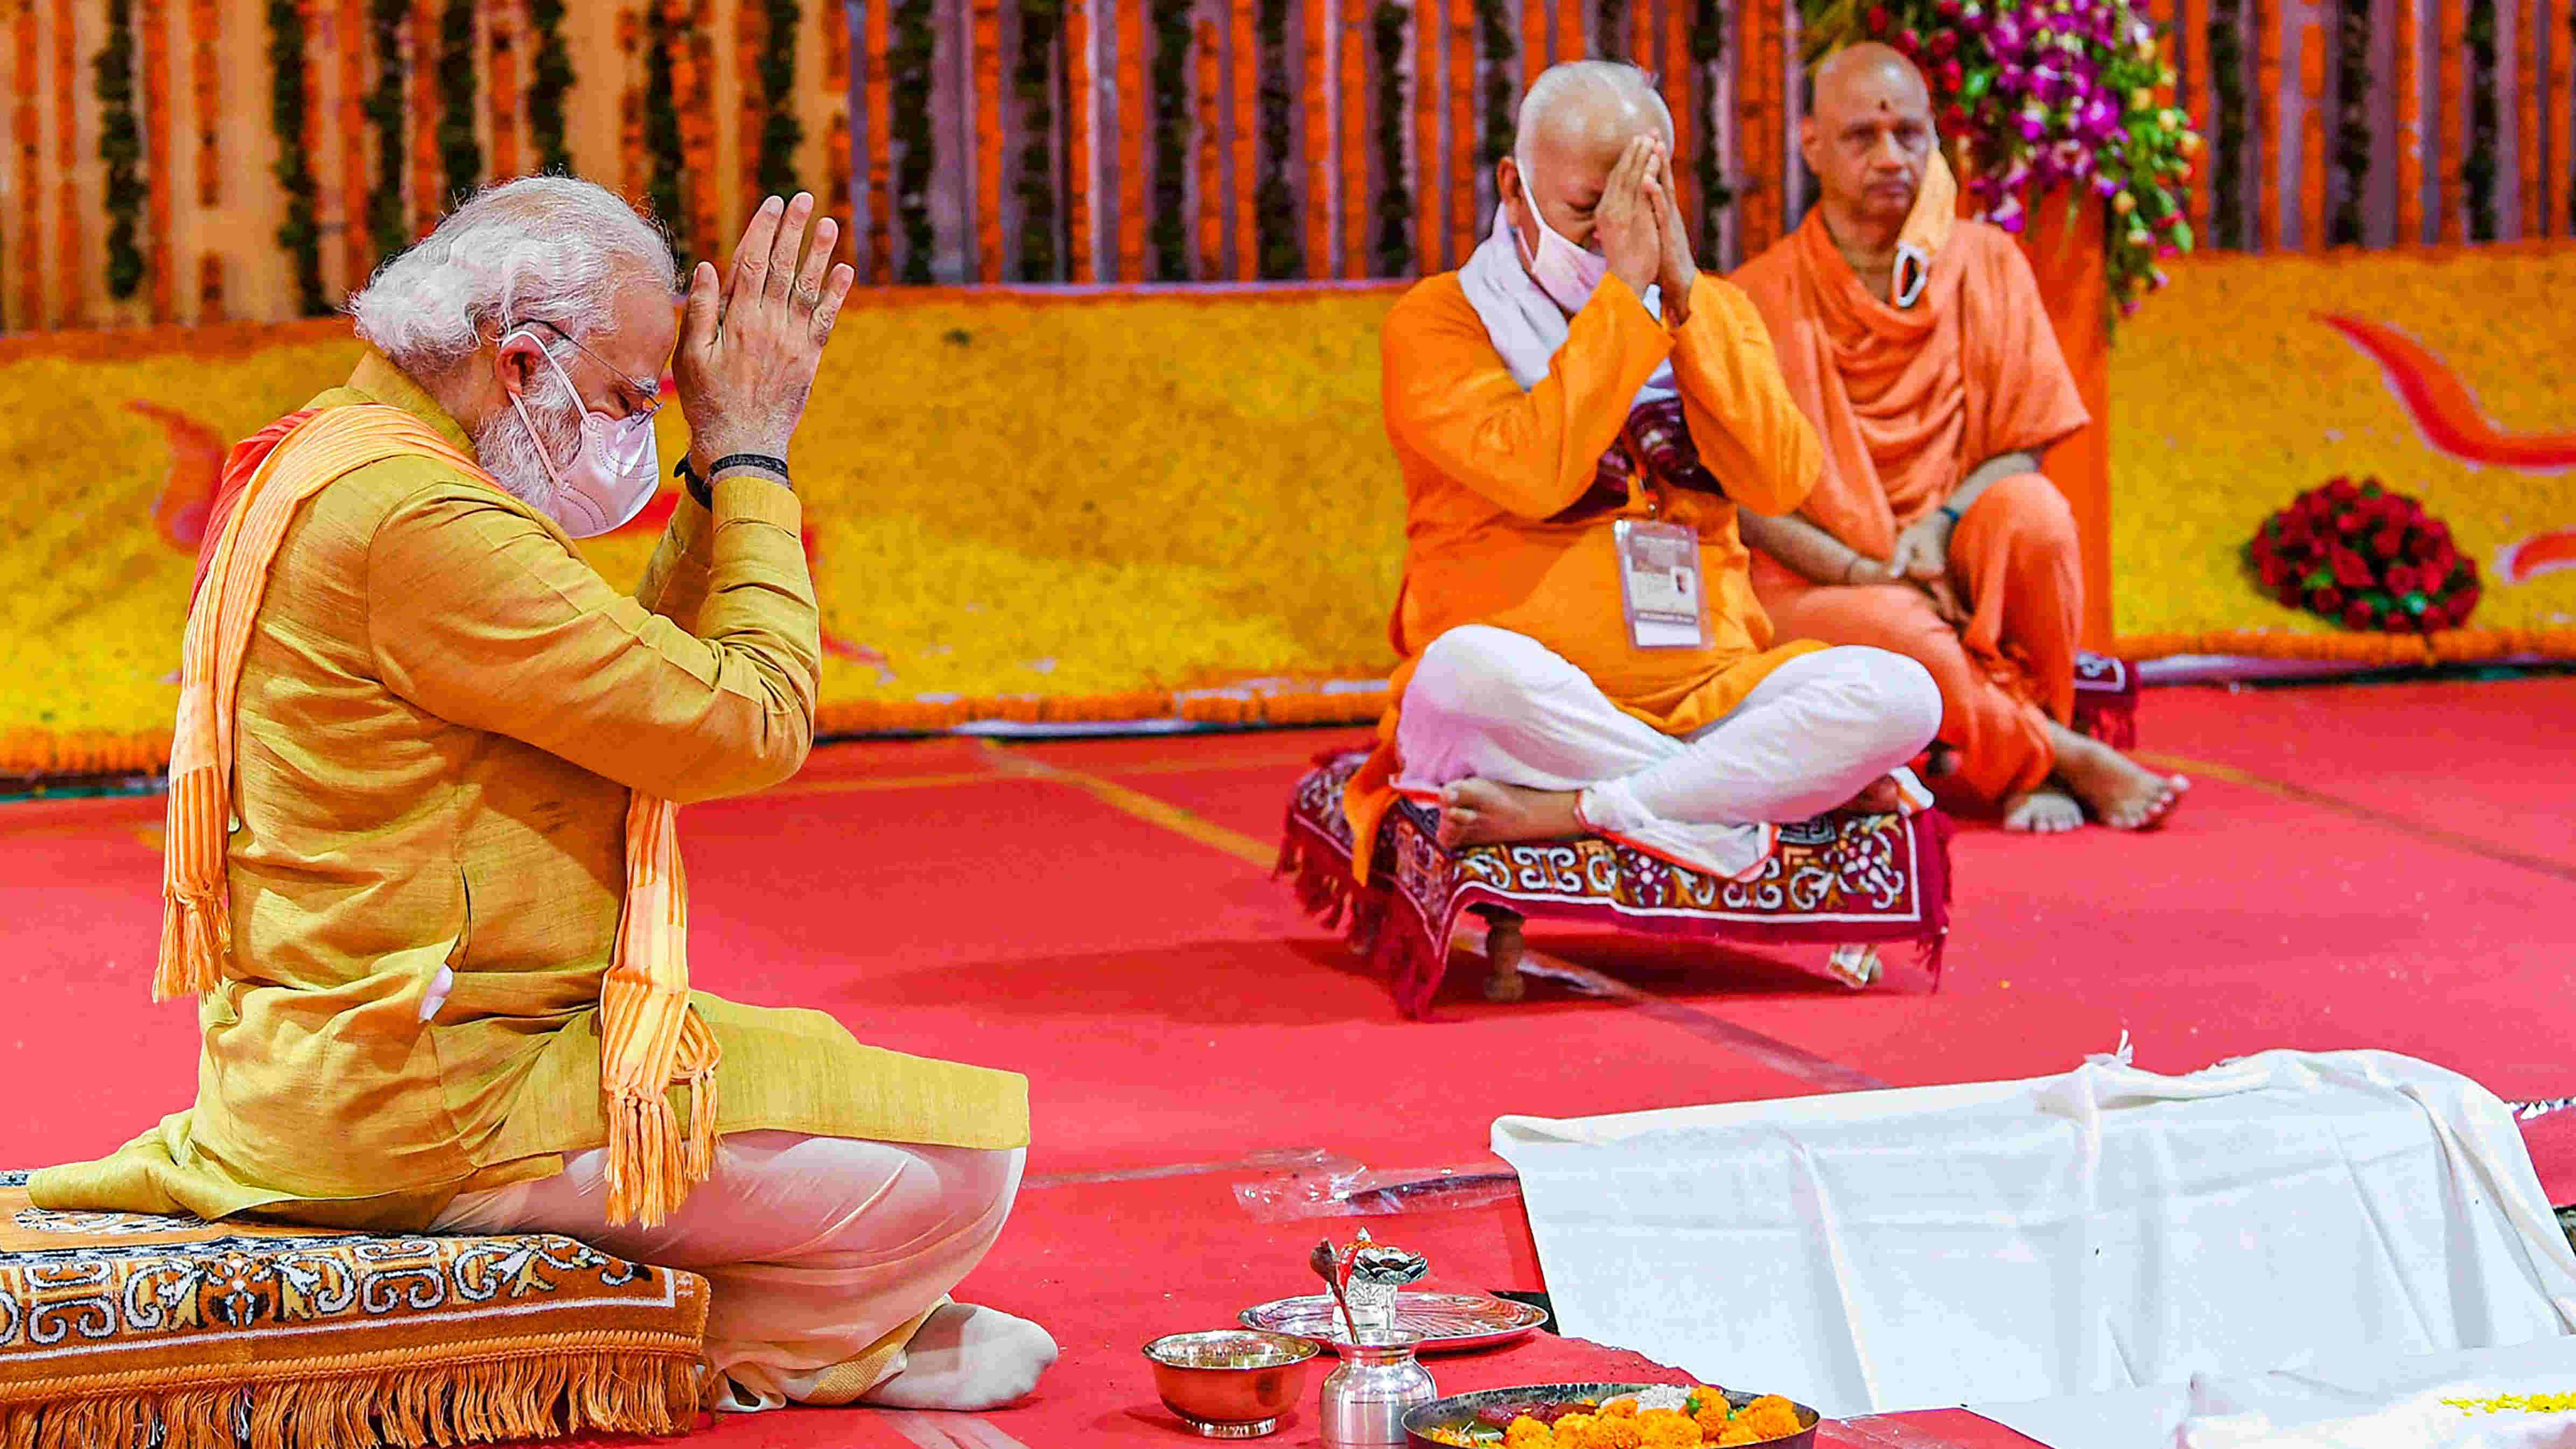 narendra-modi - Ayodhya: significance of the Ram temple bhoomi pujan is  being understated - Telegraph India